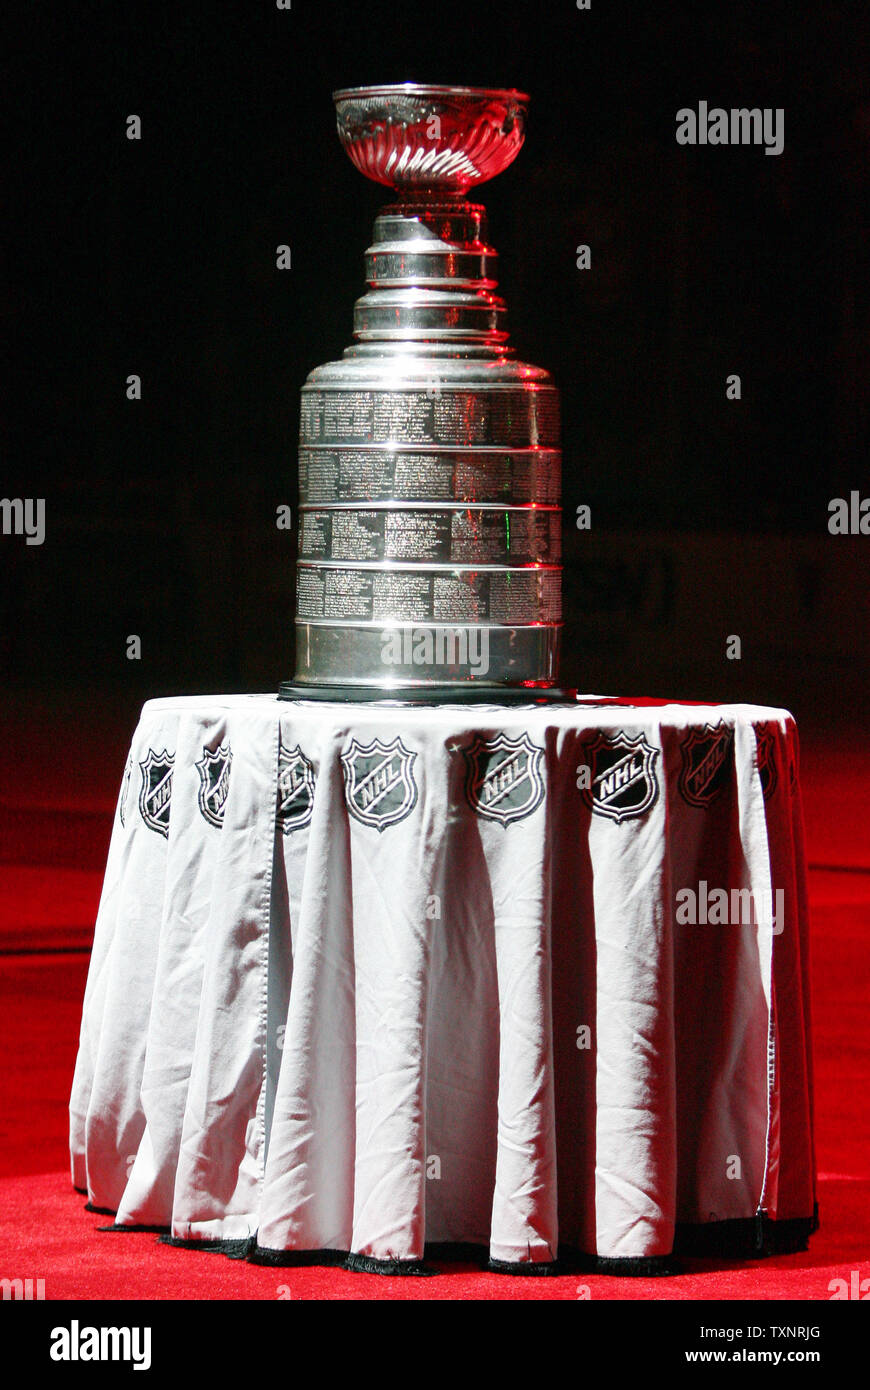 The Stanley cup rests near center ice during the Steve Yzerman jersey retirement ceremony at Joe Louis Arena in Detroit on January 2, 2007.  Yzerman helped the Red Wings win the Stanley Cup three times during his 23-year career.  (UPI Photo/Scott R. Galvin) Stock Photo